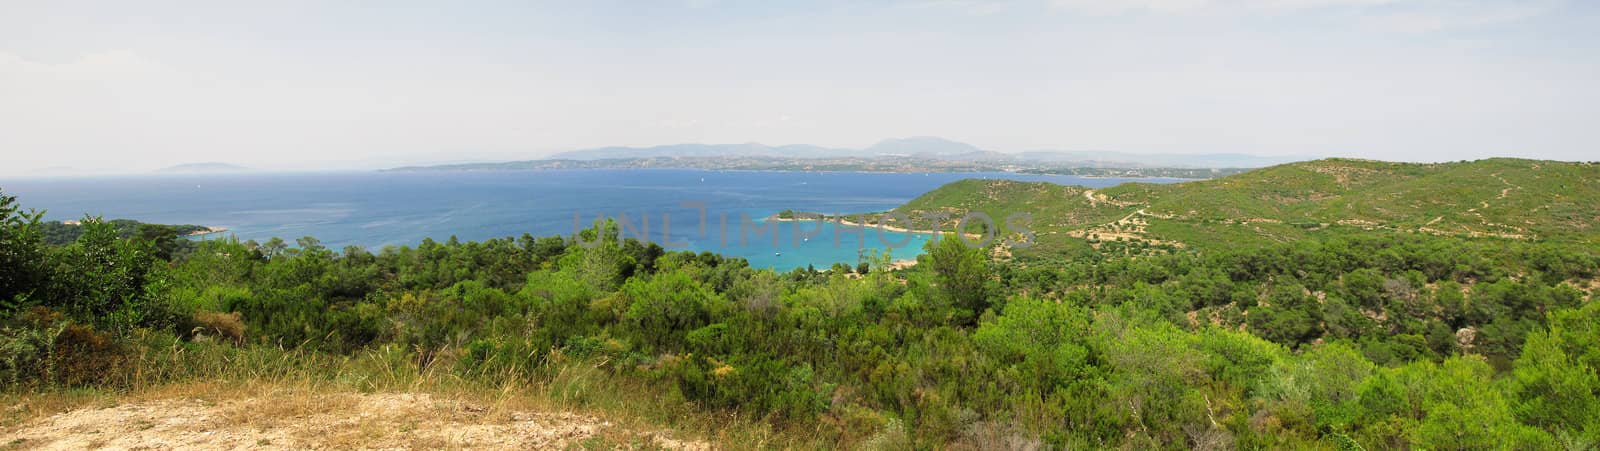 Panorama view of mountains and sea from the island of spetses in Greece, 